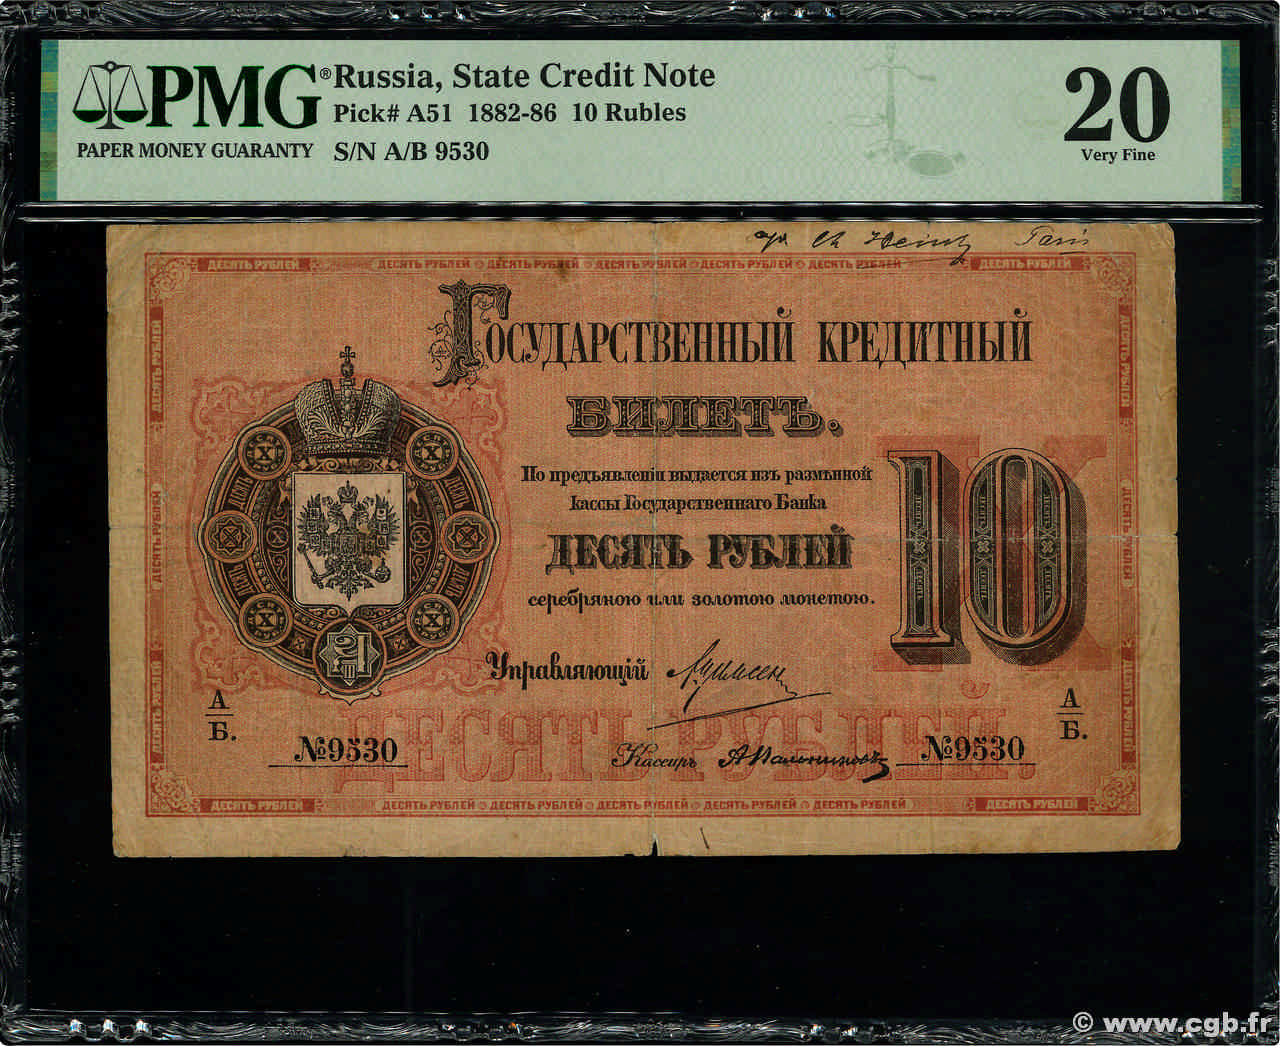 10 Roubles RUSSIA  1884 P.A51 F